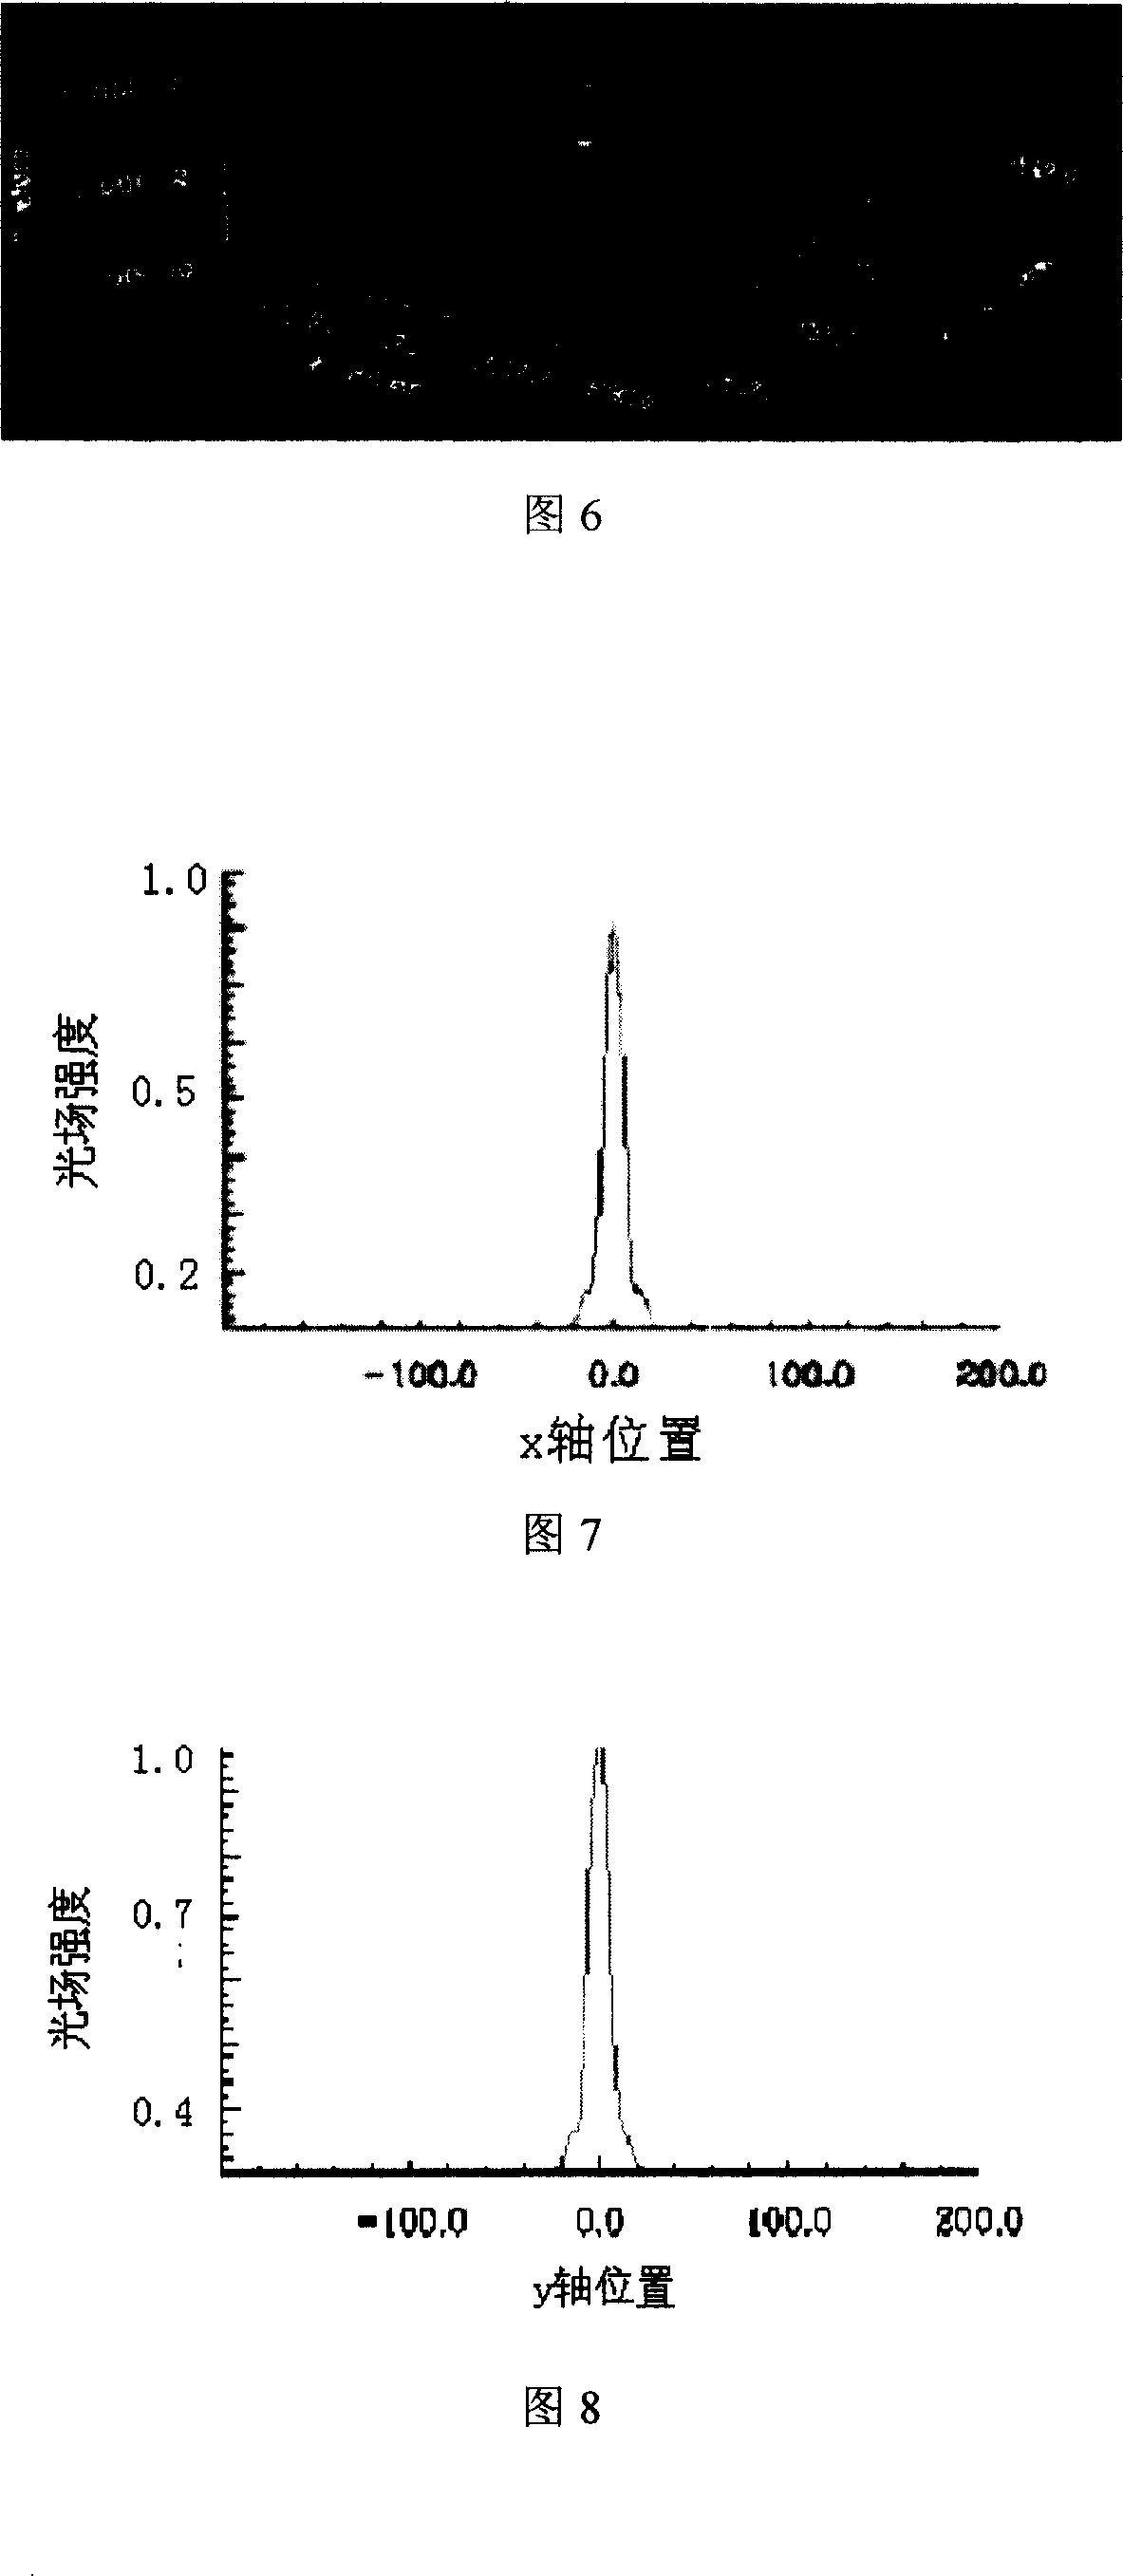 Self organizing coherent optic fiber wave guide and its producing method